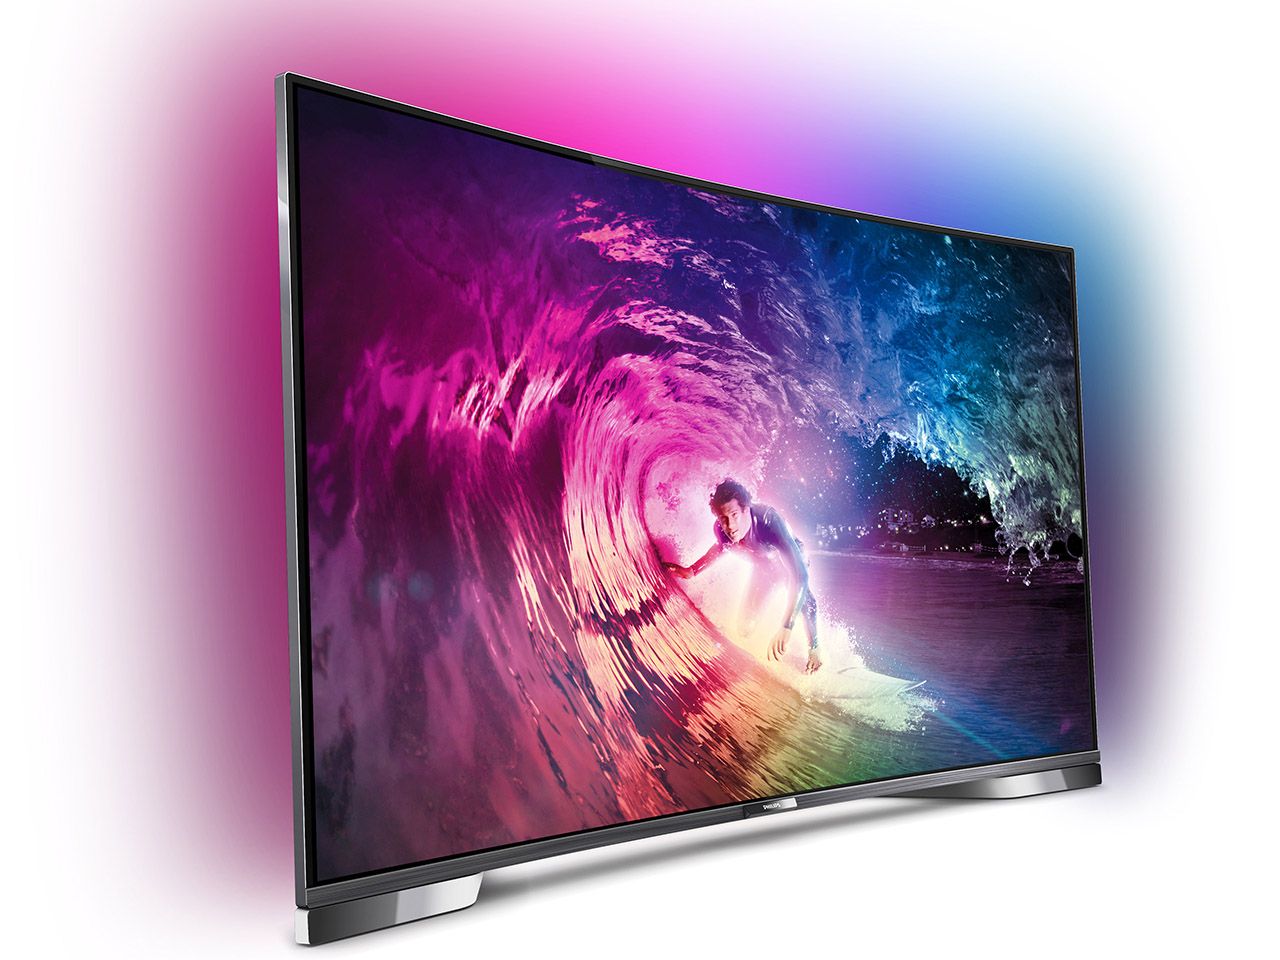 tp vision announces uhd philips tvs for all budgets 4k for all starts here image 5